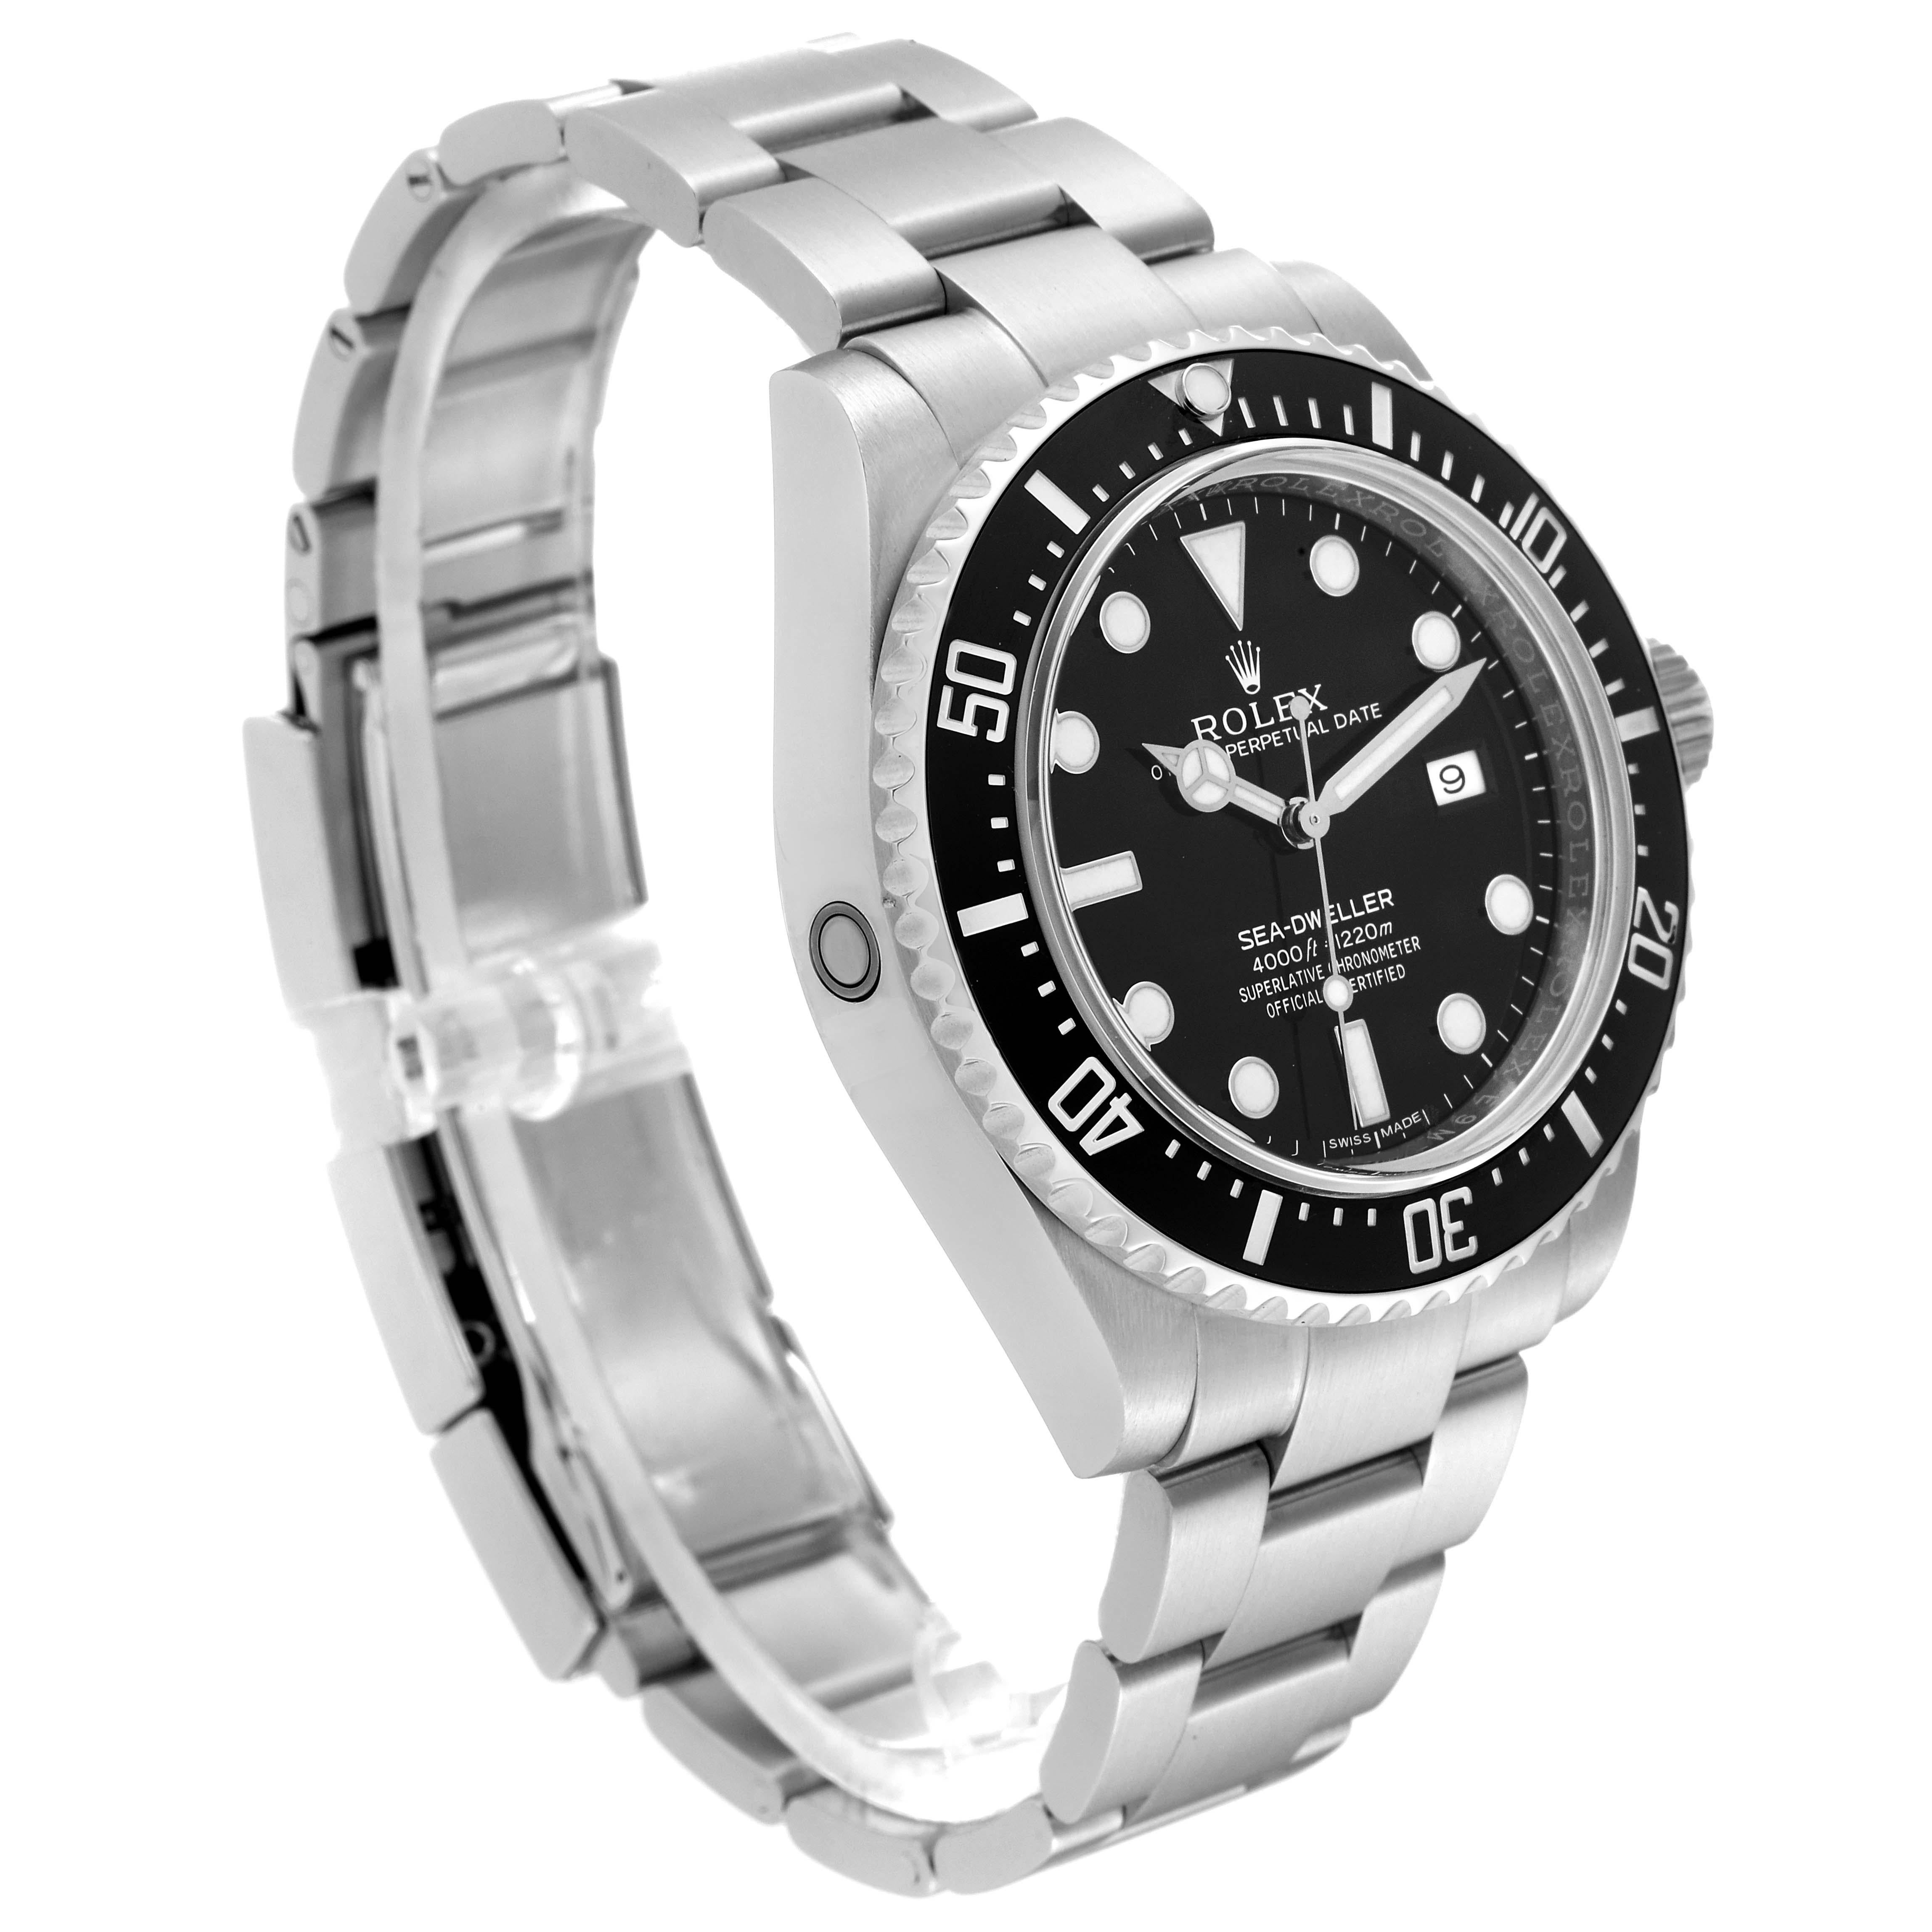 Rolex Seadweller 4000 Black Dial Automatic Steel Mens Watch 116600 For Sale 6